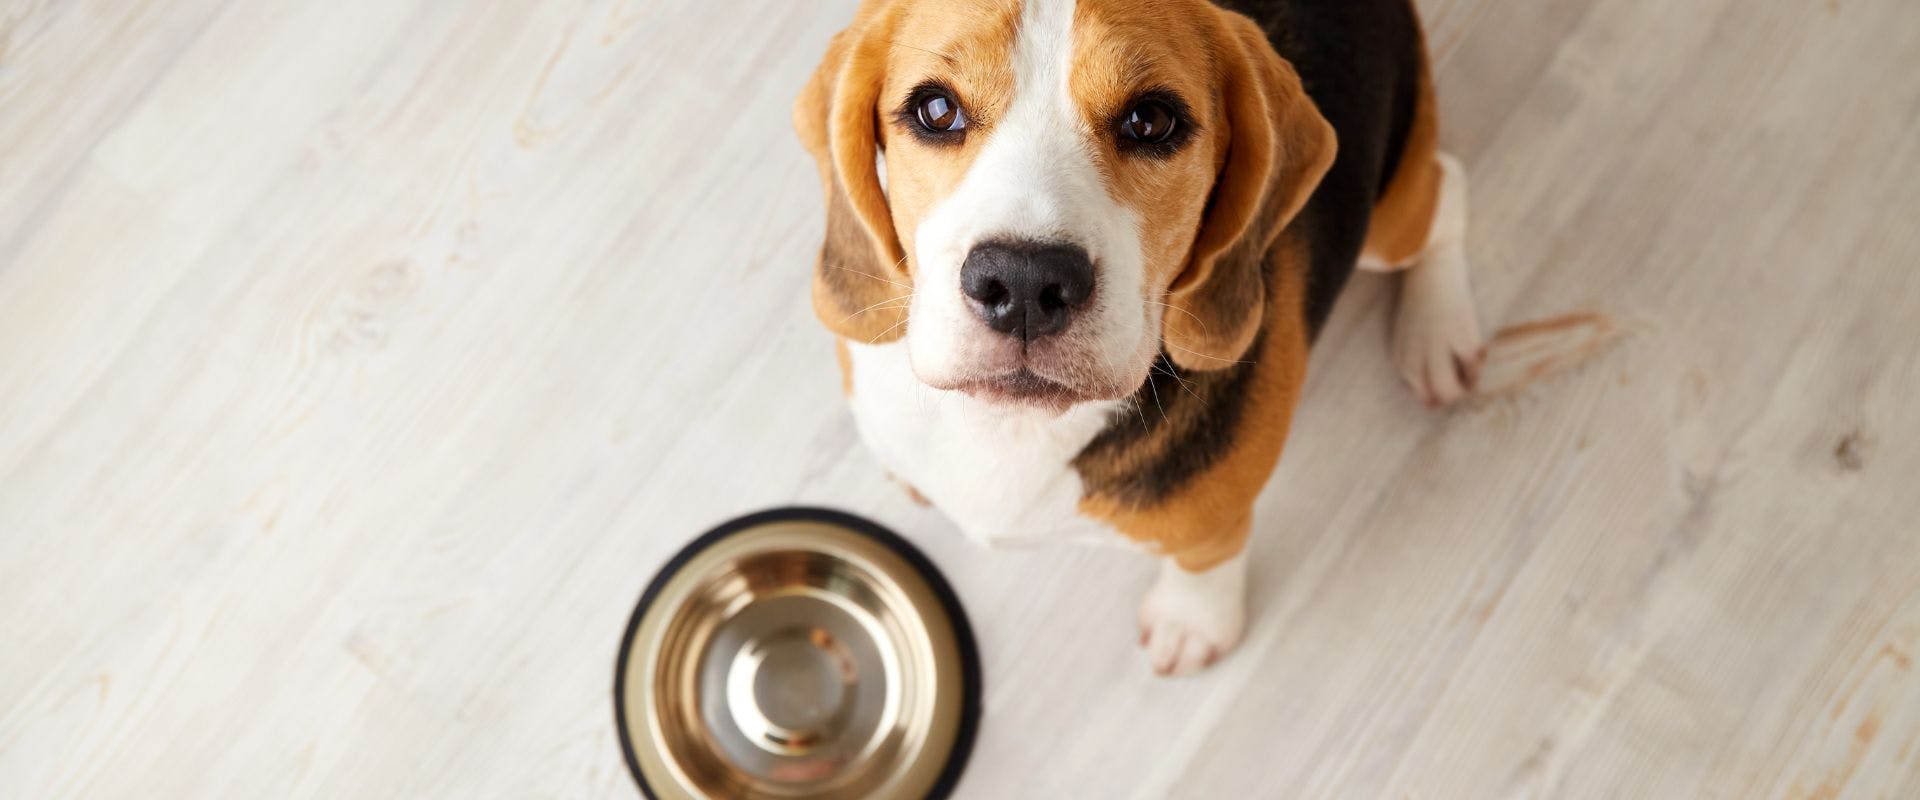 Beagle dog waiting for food with metal bowl